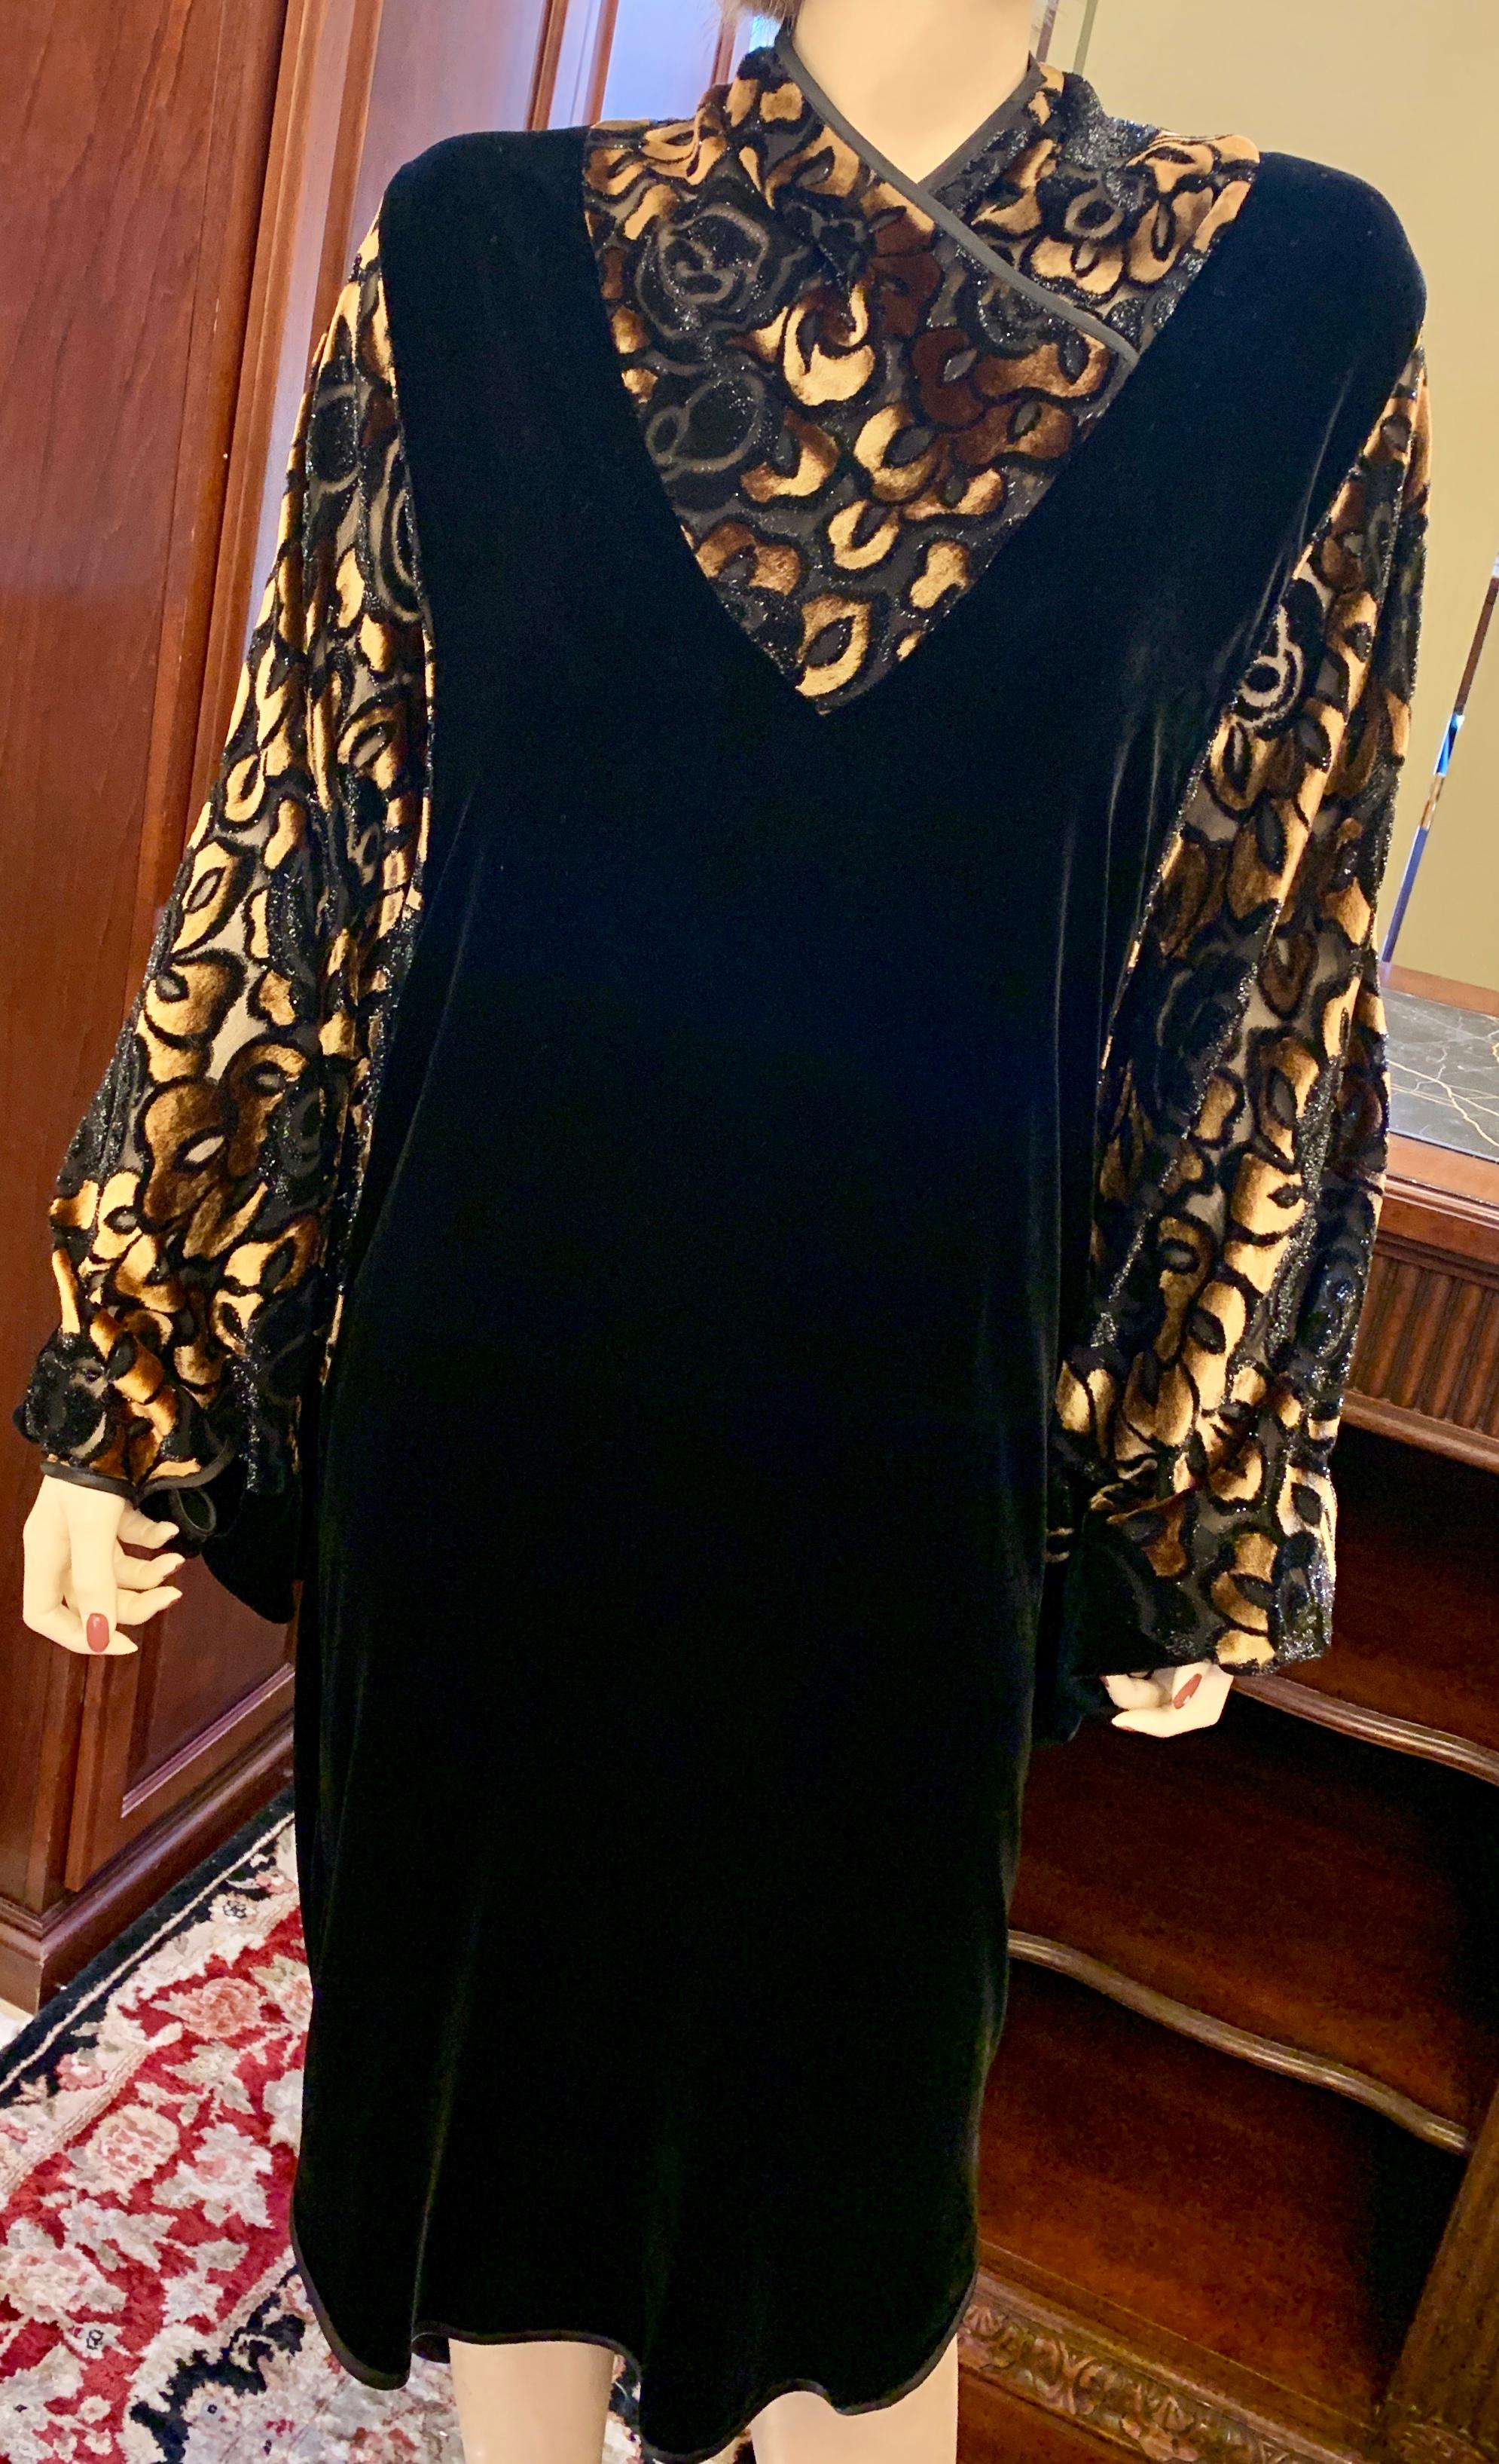 Dramatic, 1920s Art Deco inspired, long sleeved black silk velvet cocoon dress is a timeless classic!  Cocoon dress features a large open shape, with the long sleeves and top “V” shaped patterns of voided silk embellished with gold and iridescent